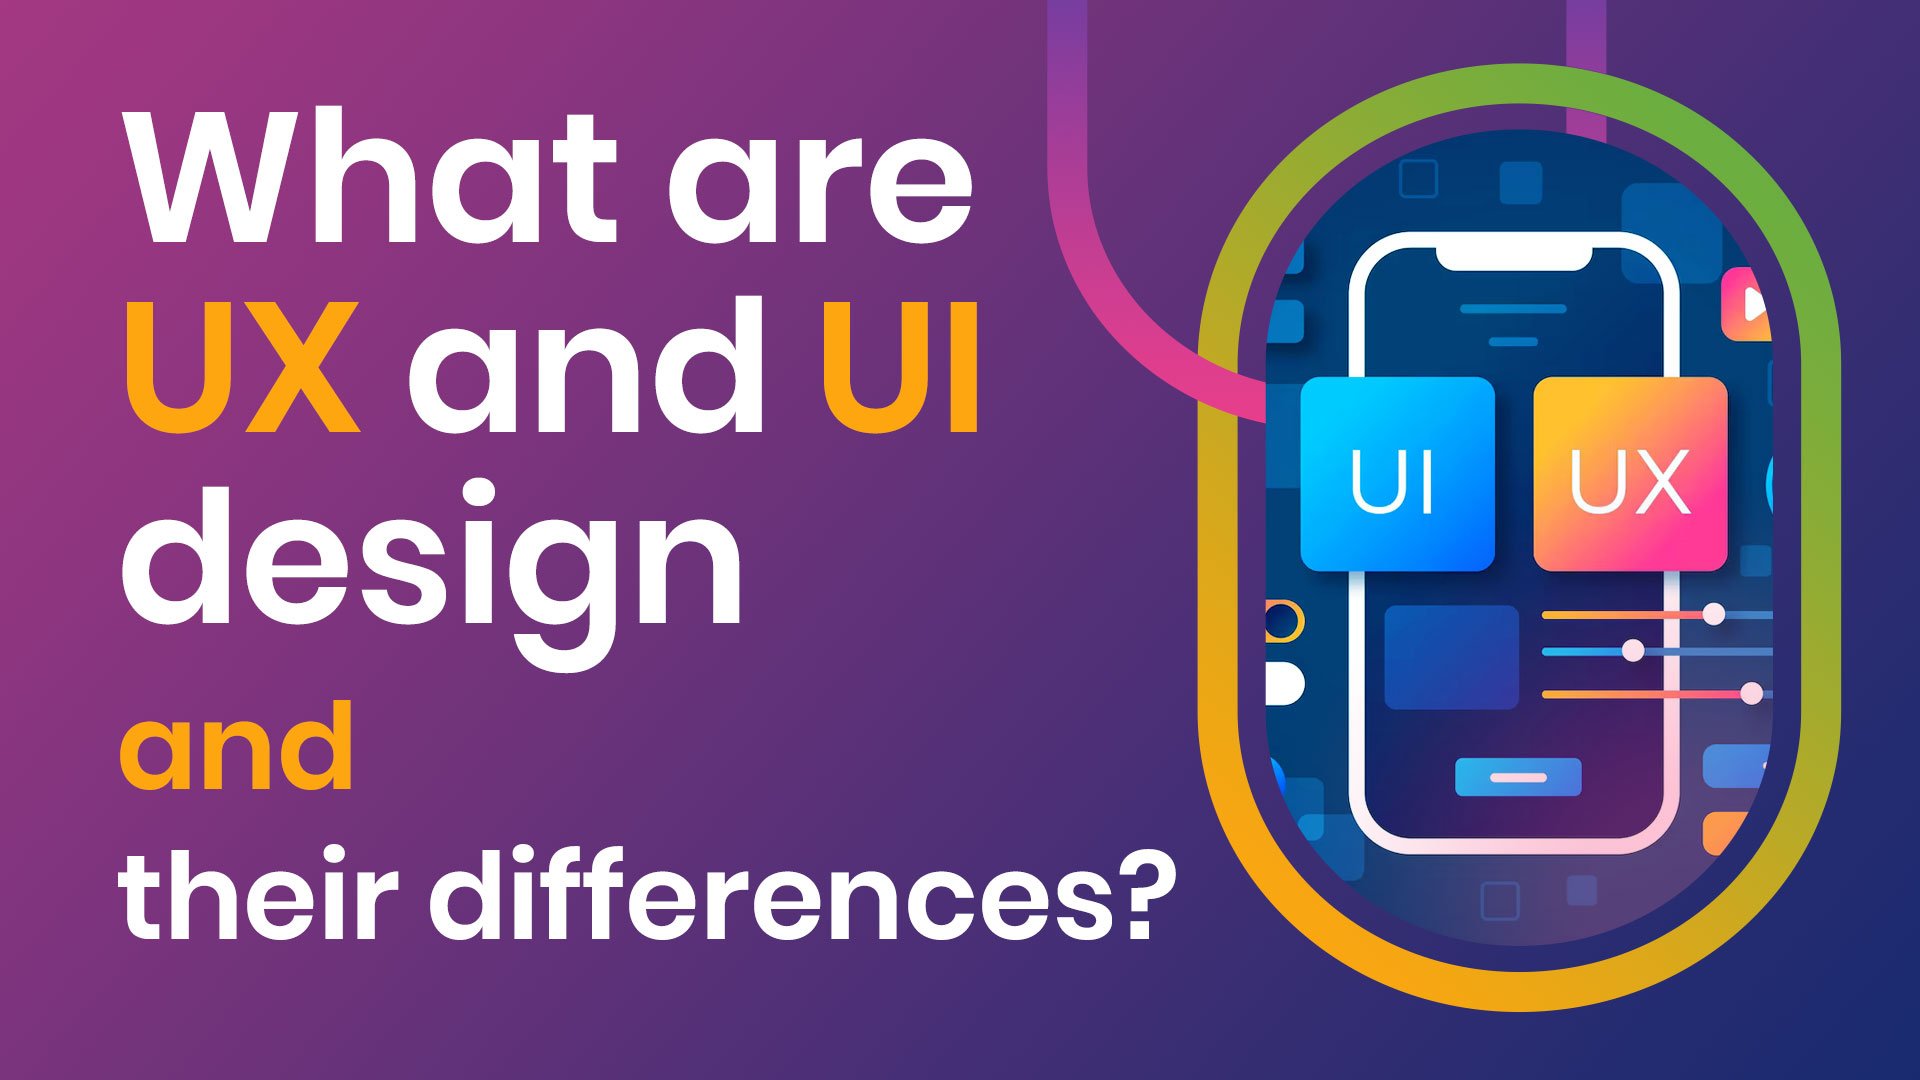 What are UX and UI design and their differences? - what are ux and ui design and their differences